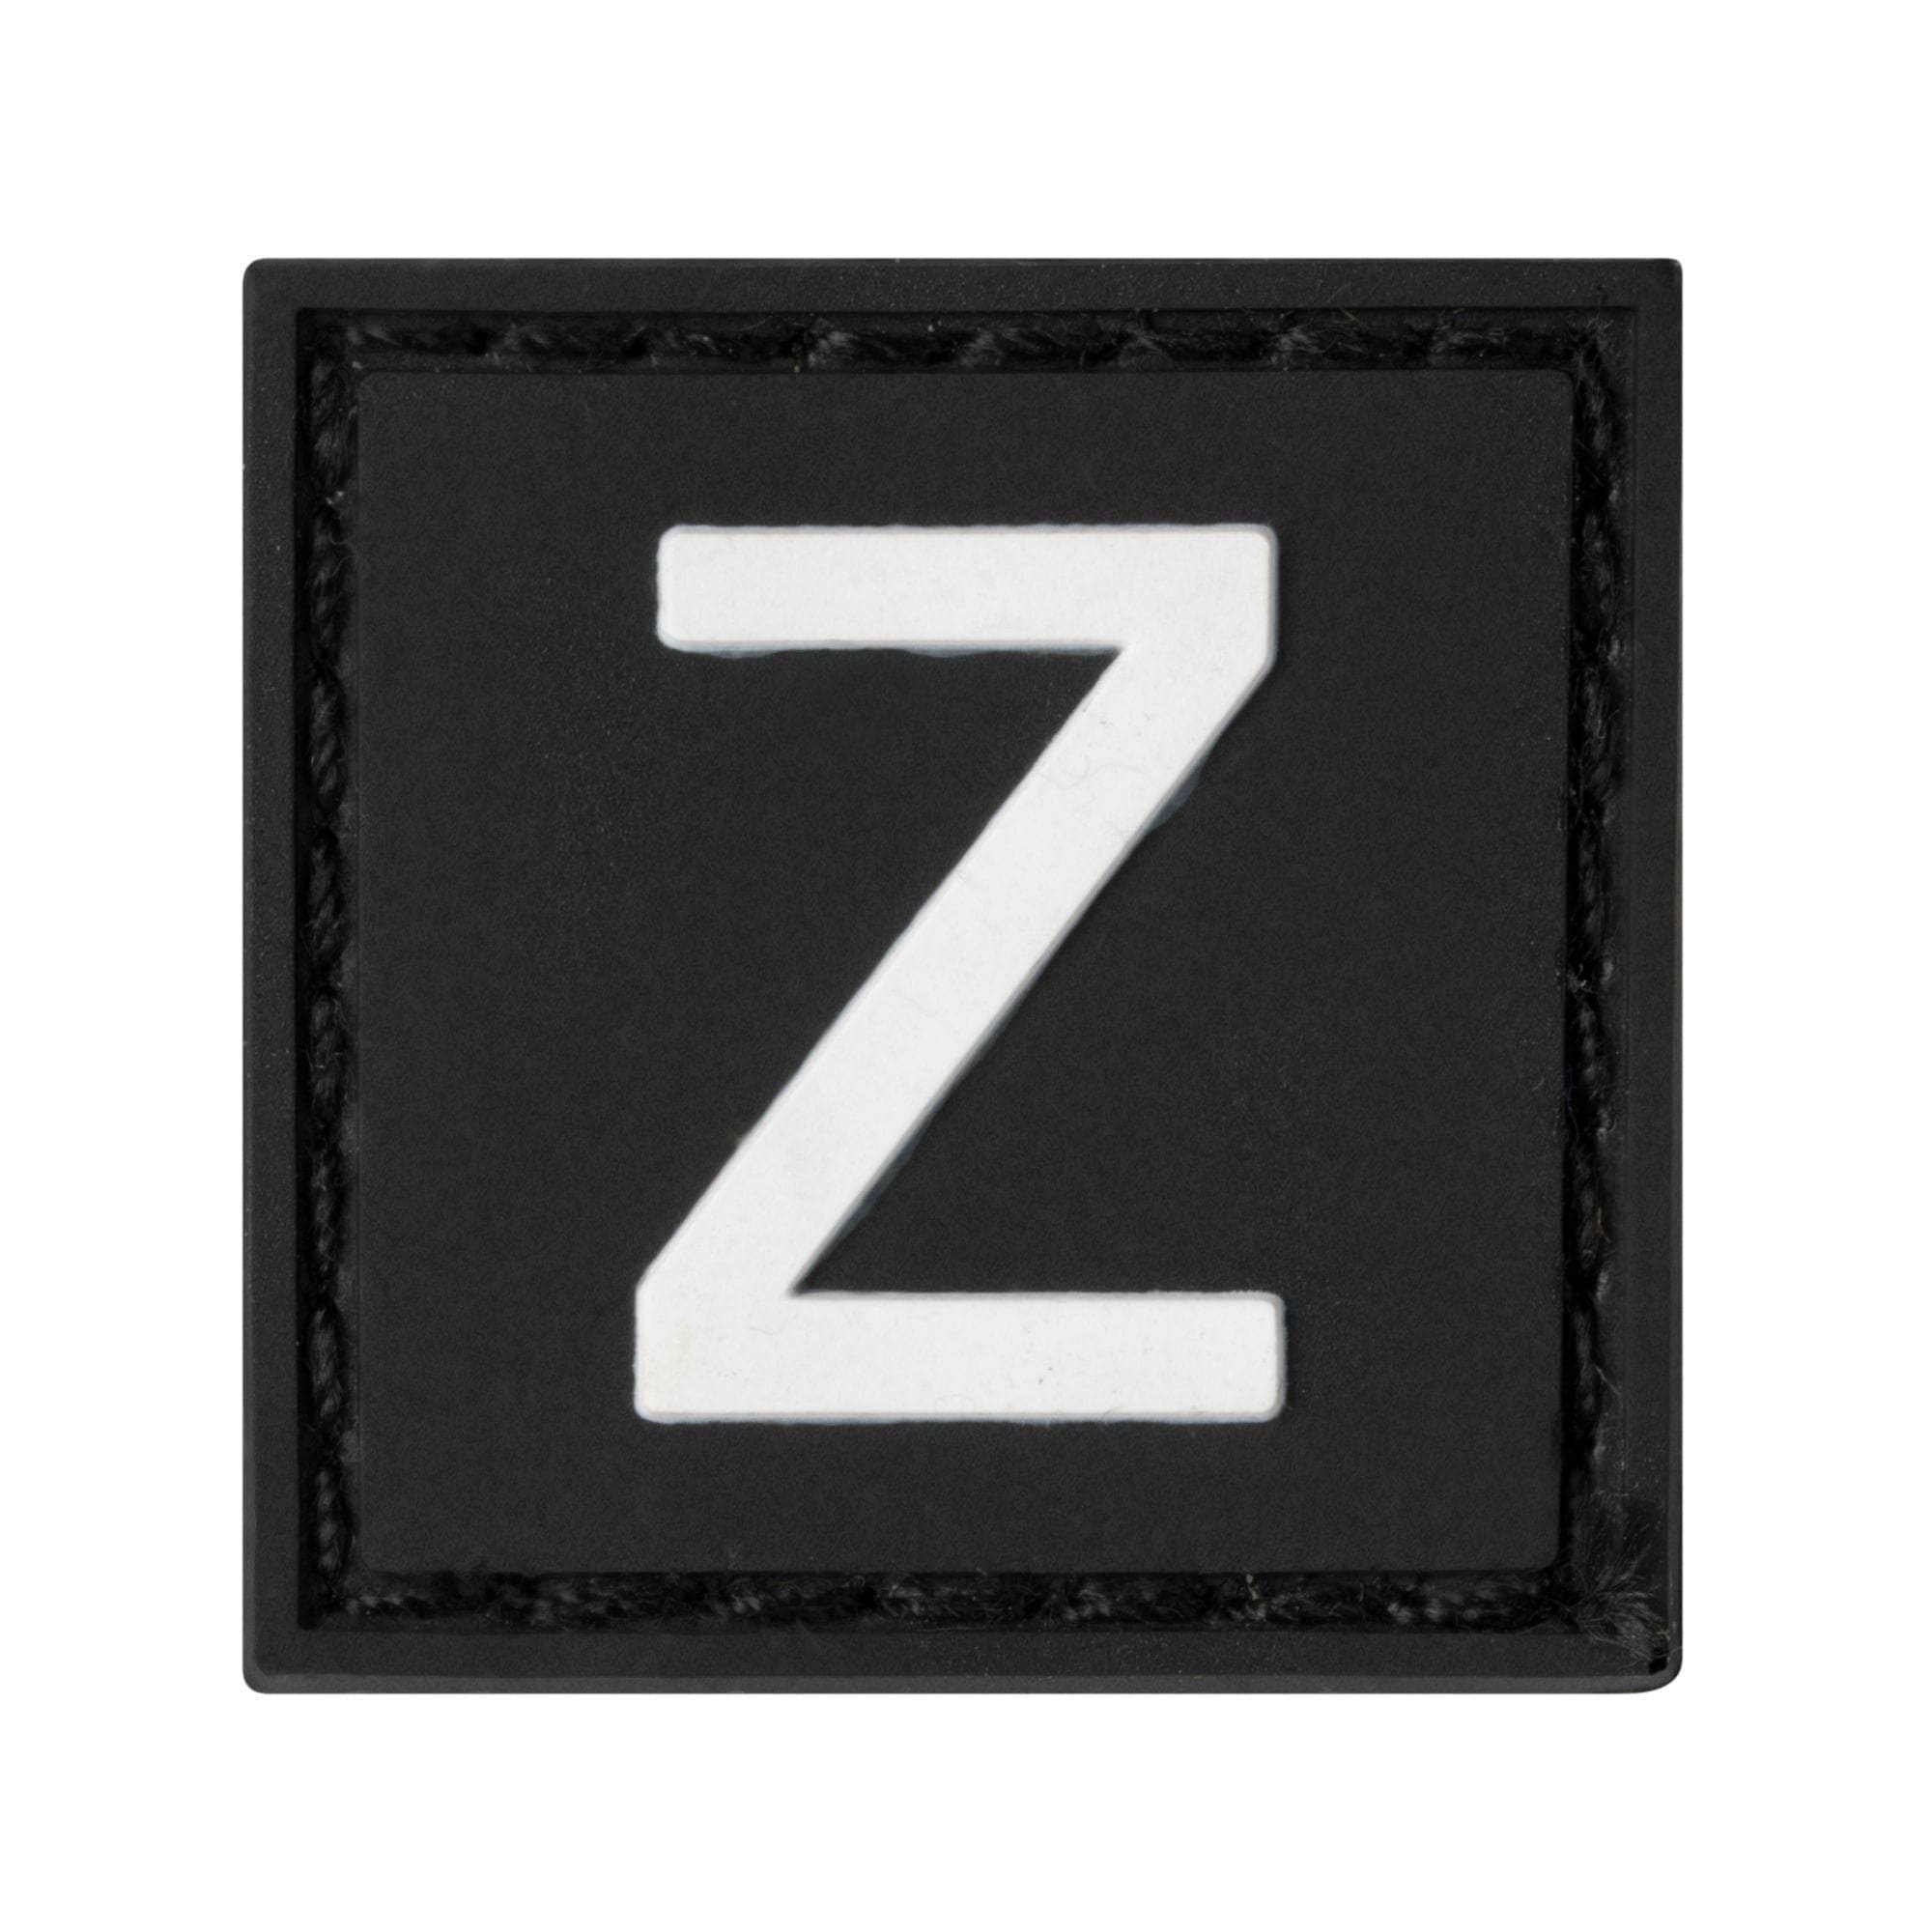 Built for Athletes Patches Z Letter Rubber Patches